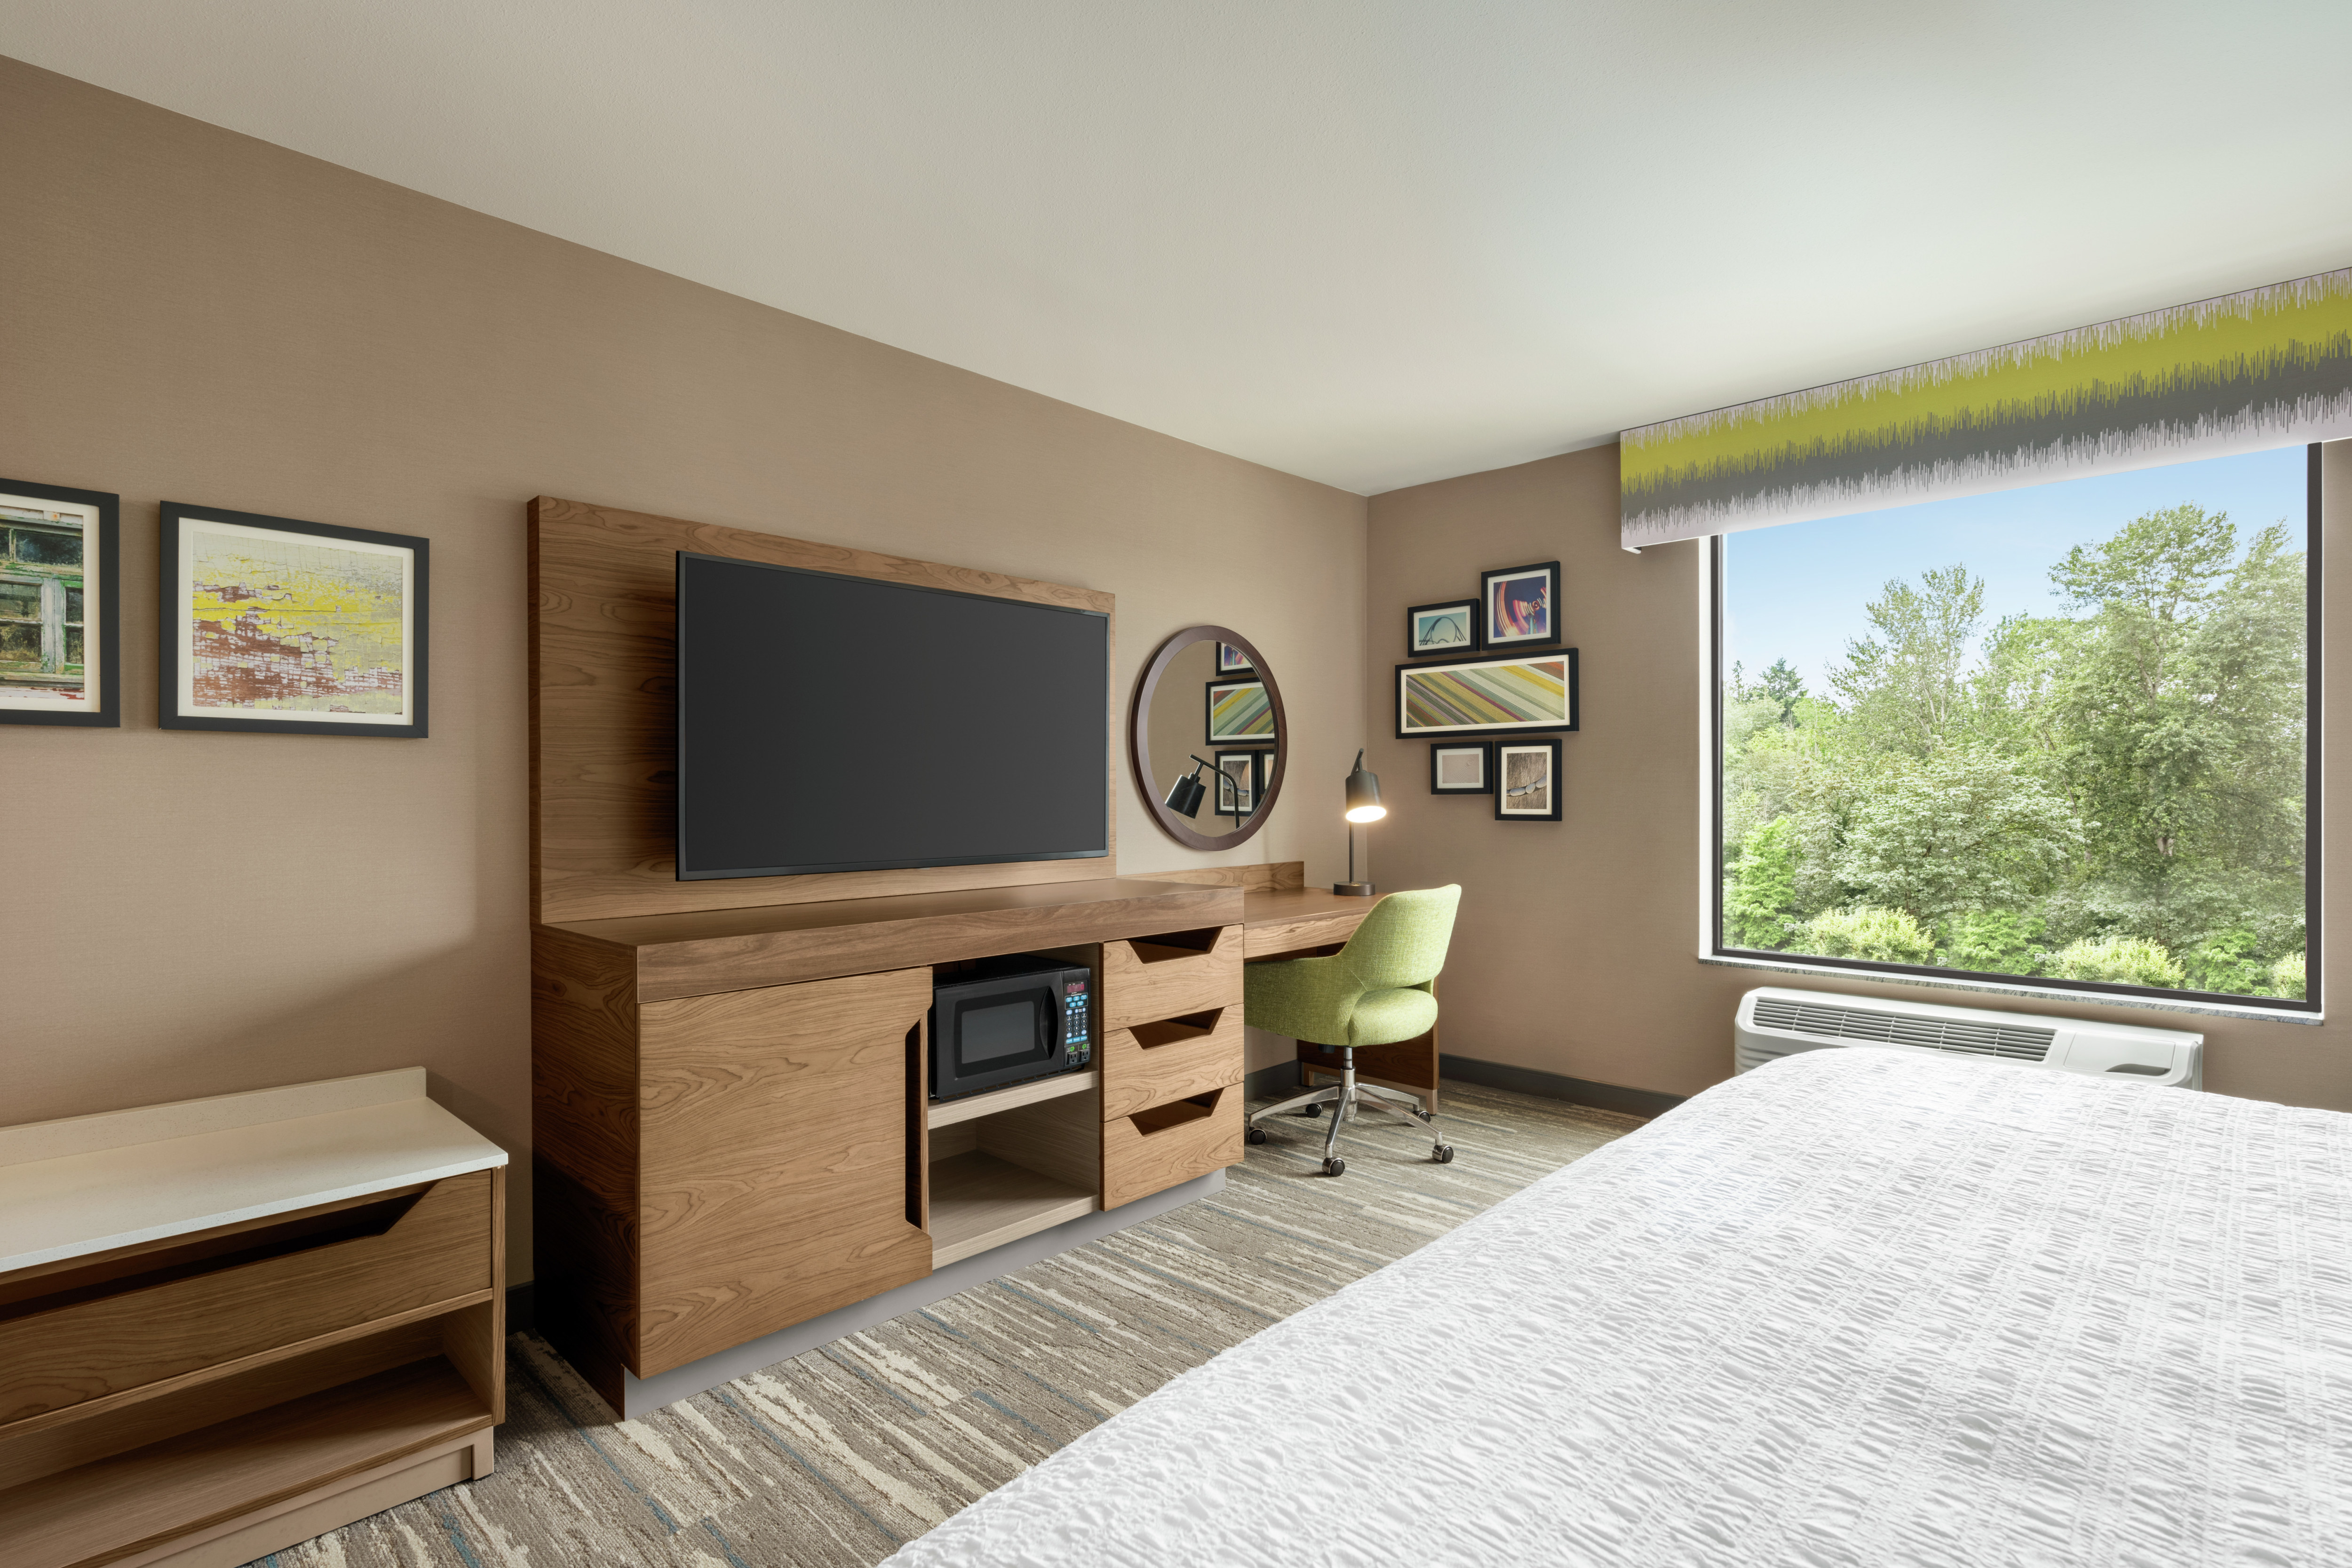 Spacious guest room featuring work desk, TV, comfortable king bed, and stunning outside view.